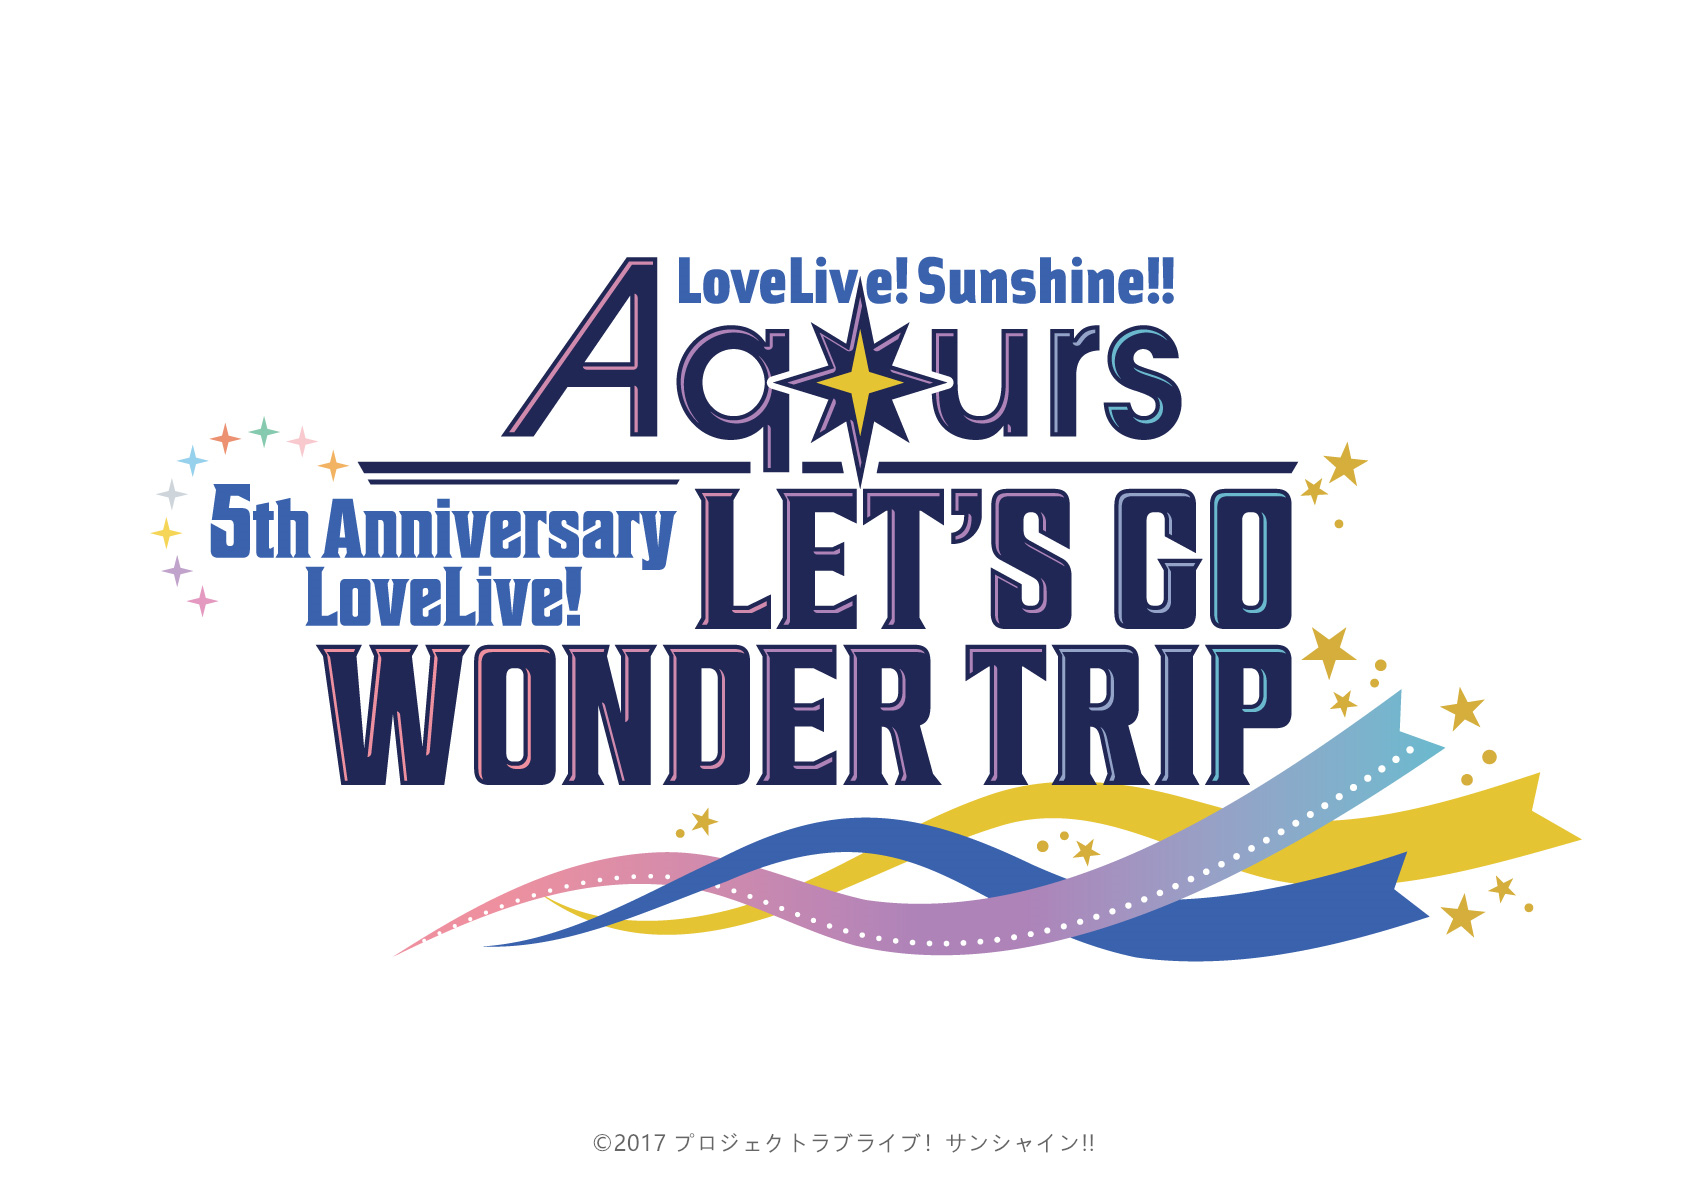 [Streaming+] Love Live！Sunshine!! Aqours 5th Anniversary LoveLive! 〜LET'S GO WONDER TRIP〜 [Go To Event]